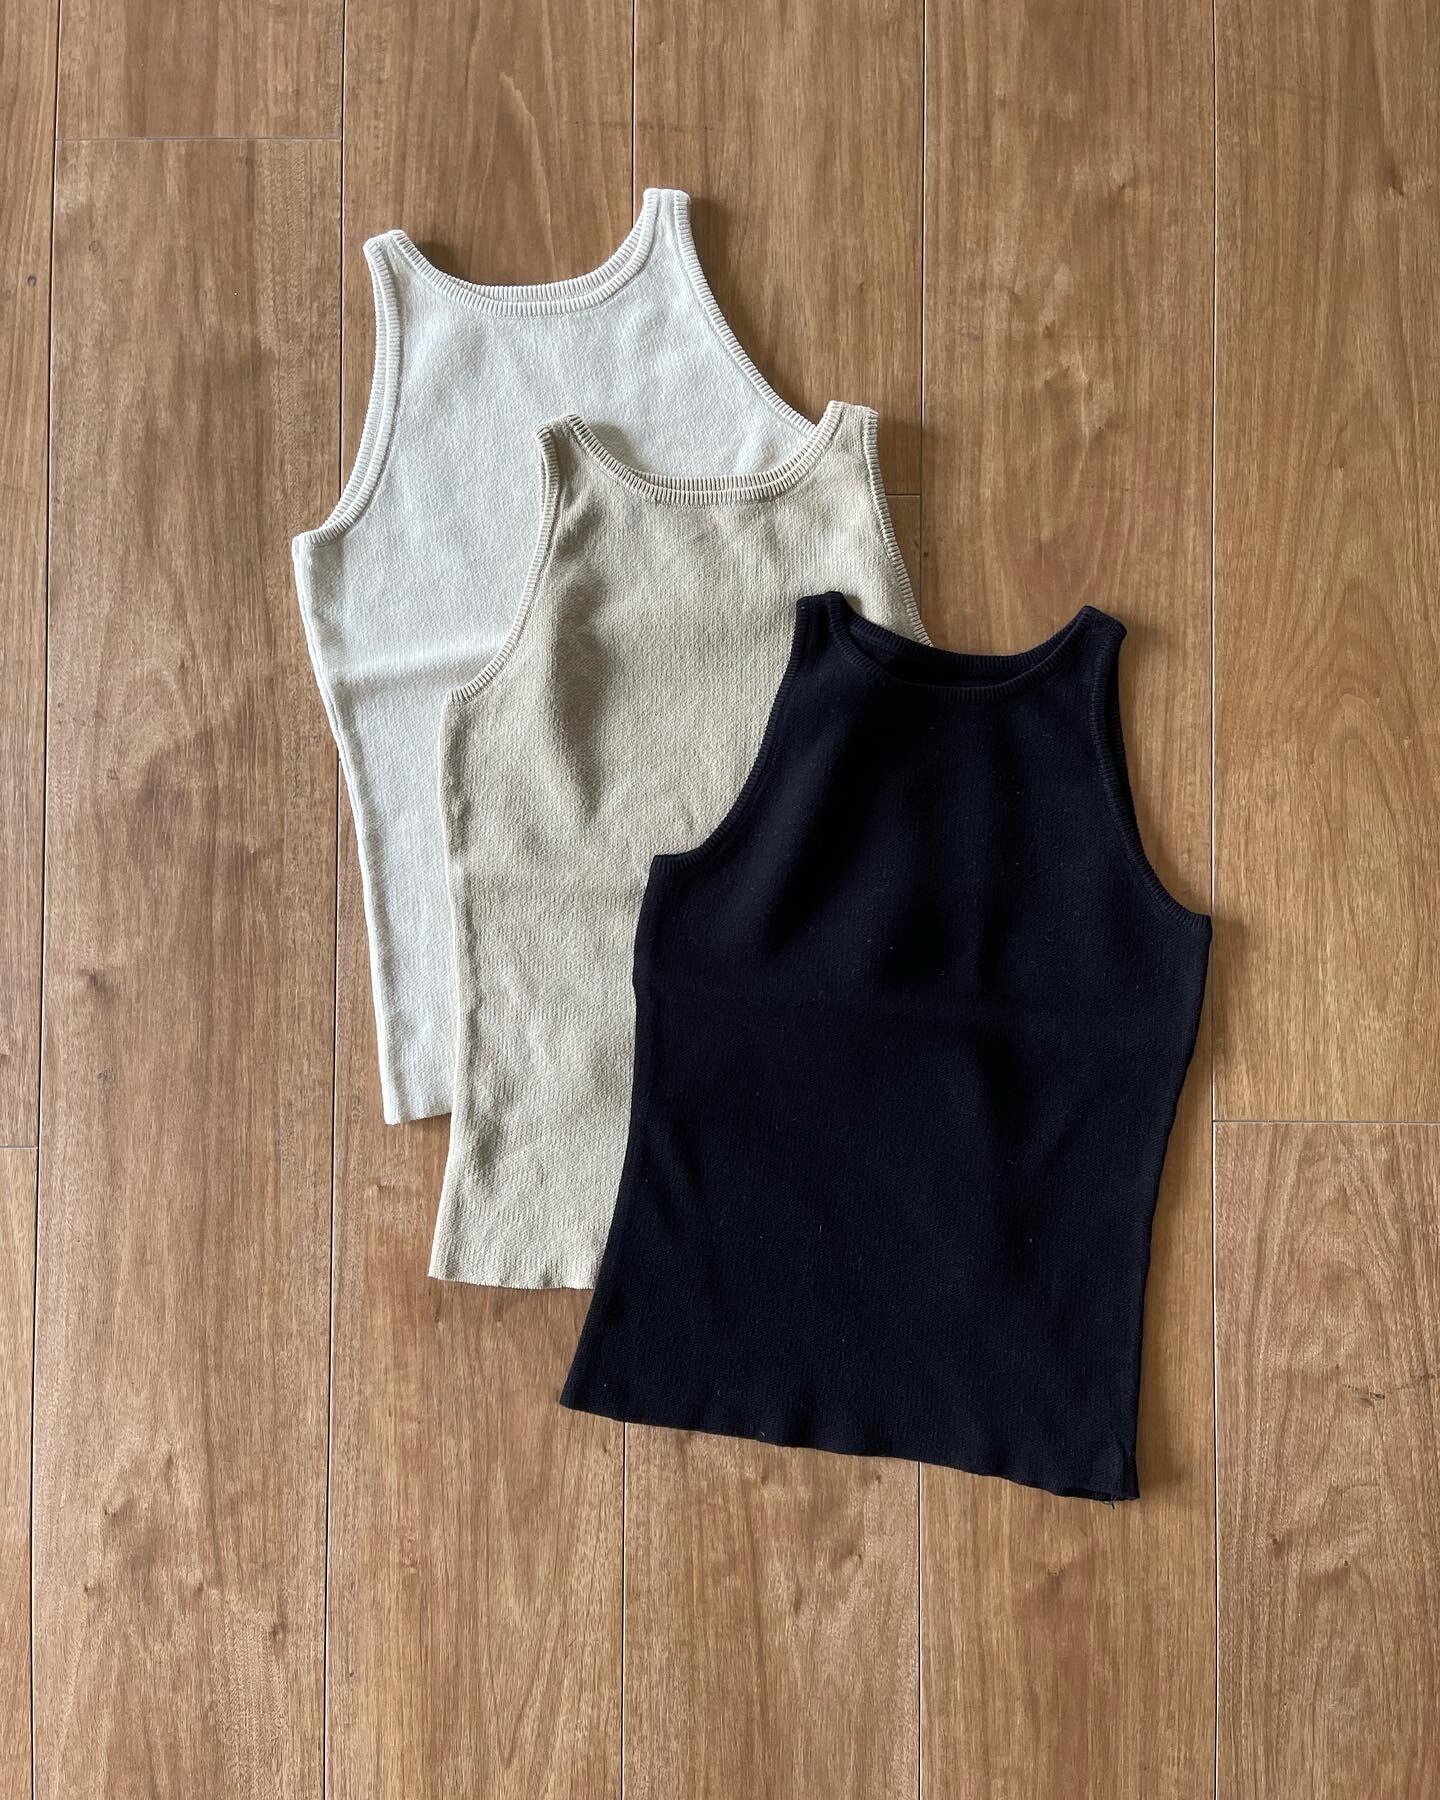 American sleeve knit tops